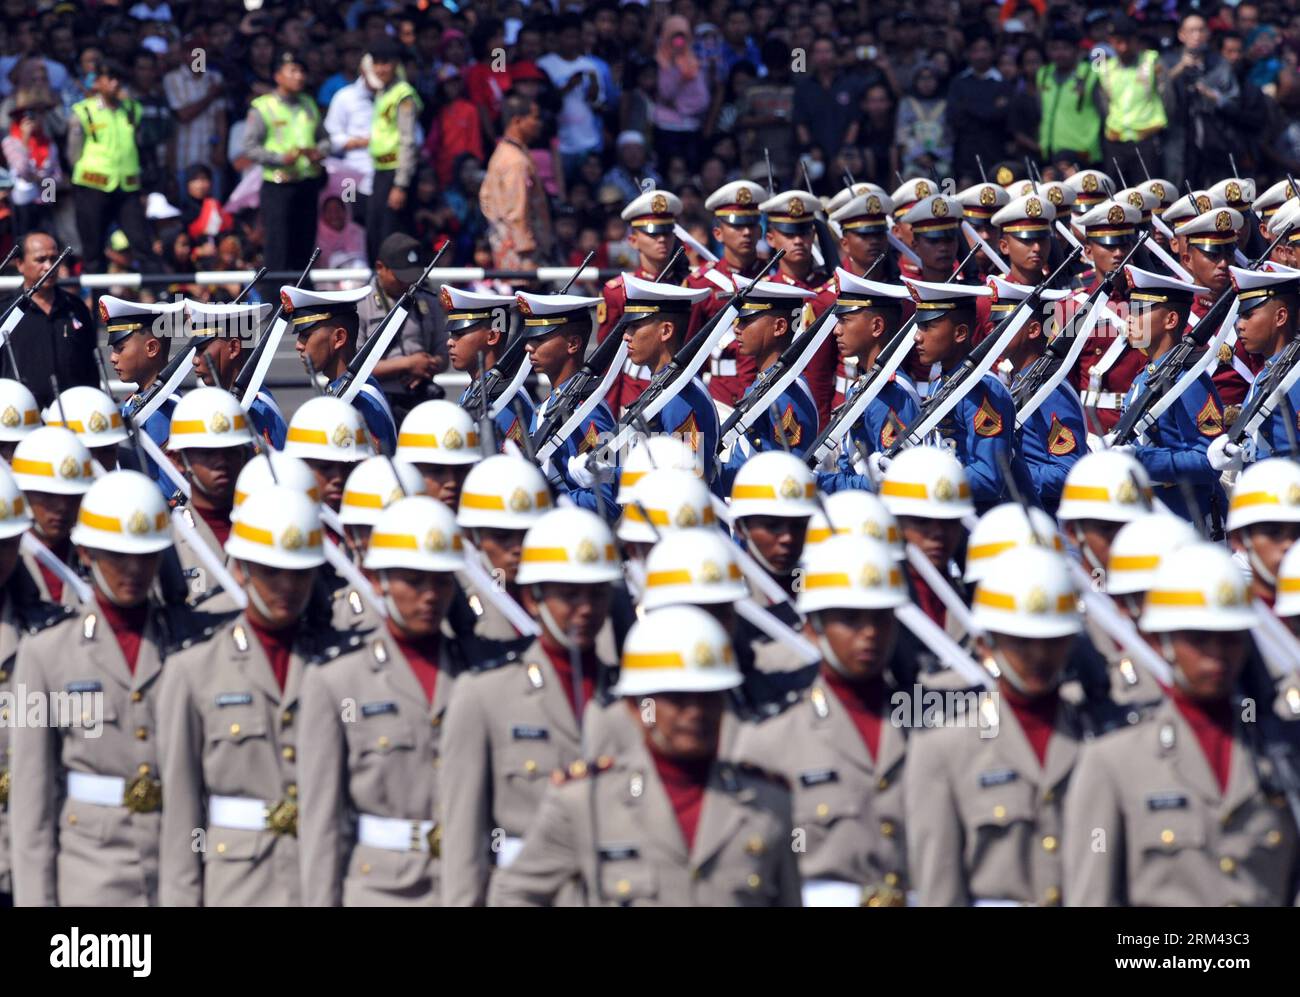 Bildnummer: 60365177  Datum: 17.08.2013  Copyright: imago/Xinhua JAKARTA,  (Xinhua) -- Members of Indonesian army parade during a celebration of the country s 68th independence anniversary at the Presidential Palace in Jakarta, Indonesia, . (Xinhua/Agung Kuncahya B.) INDONESIA-JAKARTA-68TH INDEPENDENCE DAY PUBLICATIONxNOTxINxCHN Politik Gesellschaft Feiertag Unabhaengigkeit Parade premiumd x0x xrj 2013 quer     60365177 Date 17 08 2013 Copyright Imago XINHUA Jakarta XINHUA Members of Indonesian Army Parade during a Celebration of The Country S 68th Independence Anniversary AT The Presidential Stock Photo